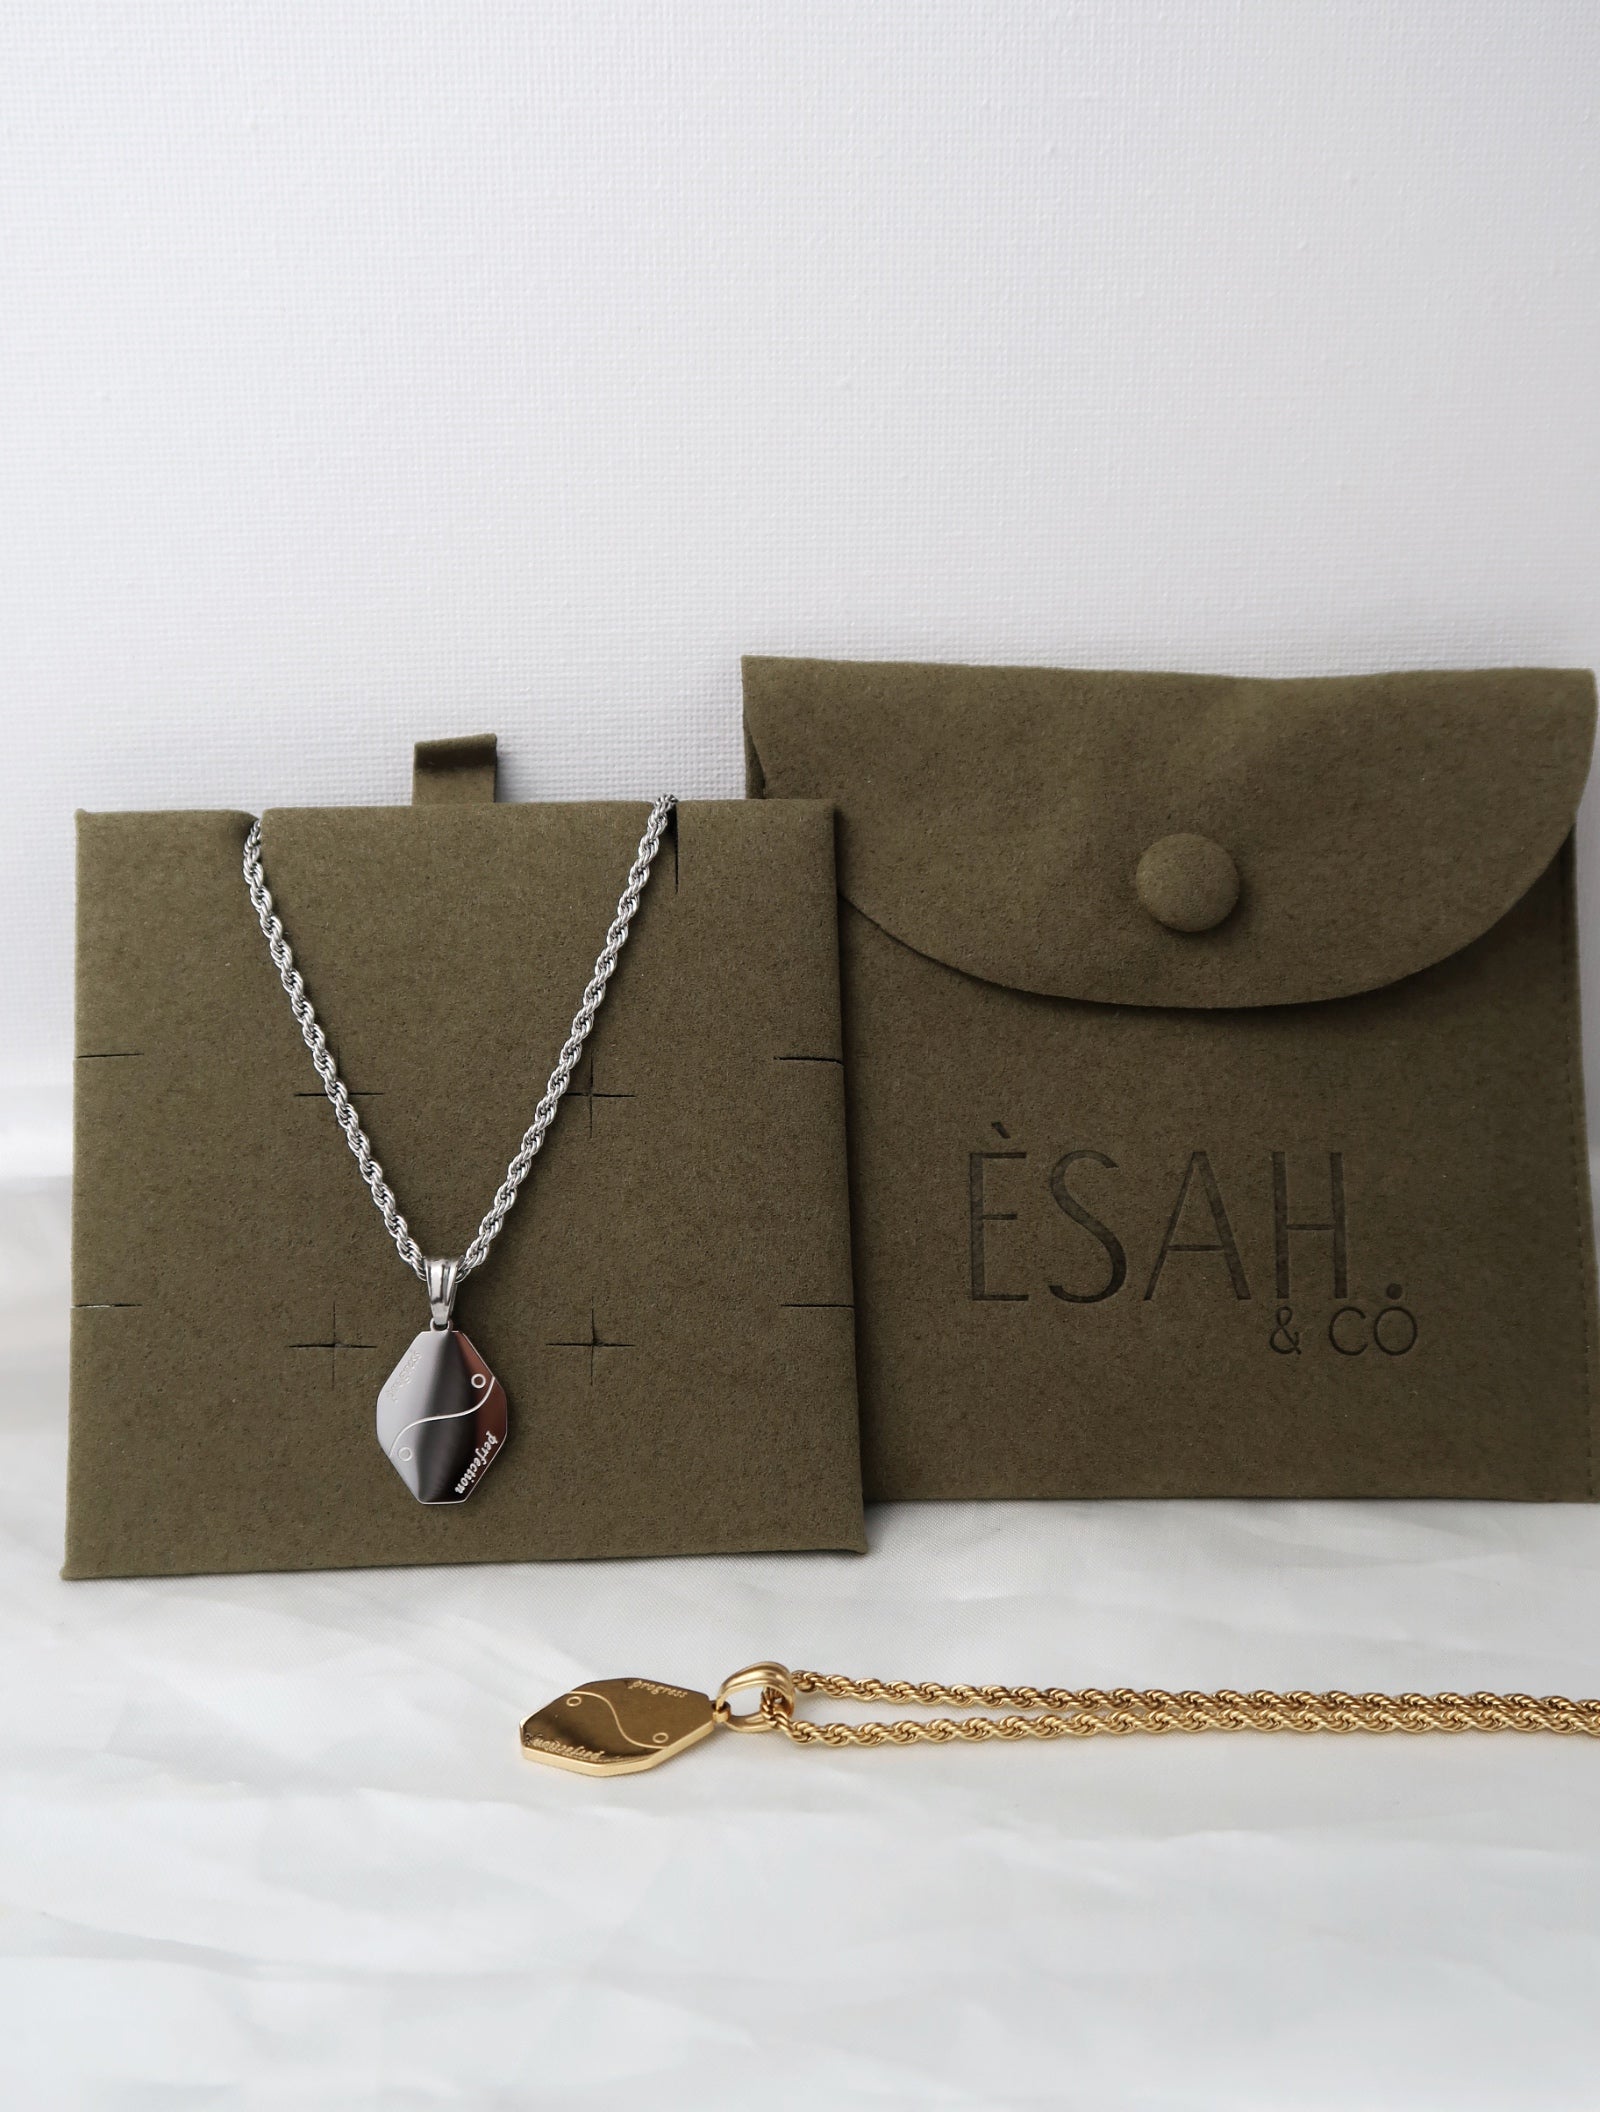 The Progress Affirmation Necklace - Unisex - Esah and Co